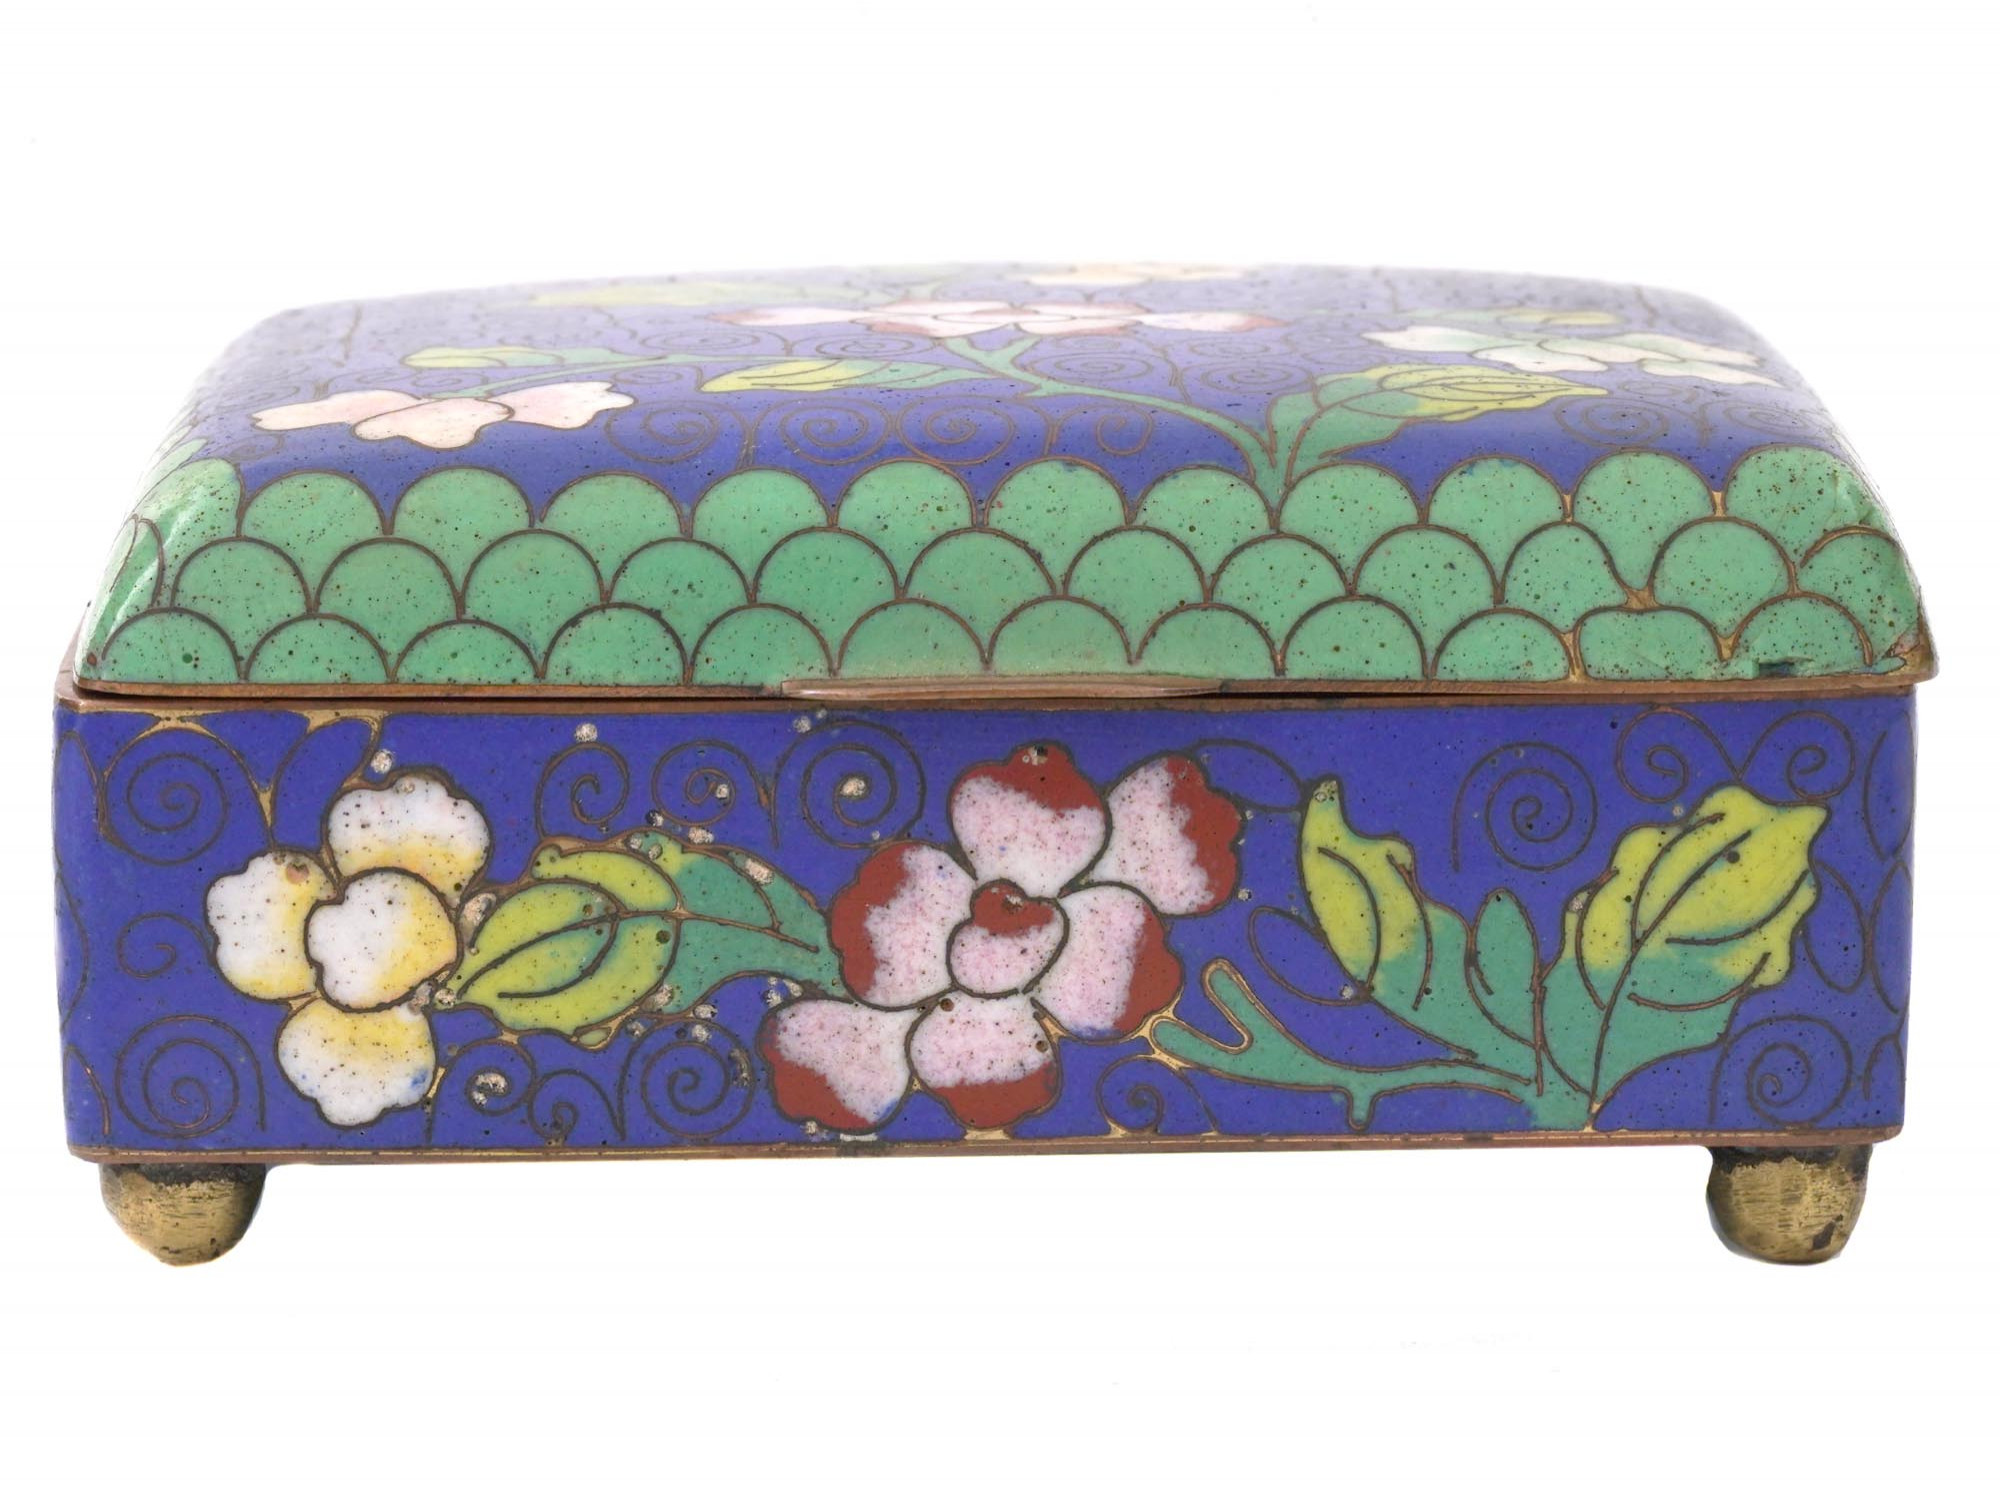 ANTIQUE CHINESE COVERED FLORAL CLOISONNE ENAMEL BOX PIC-2